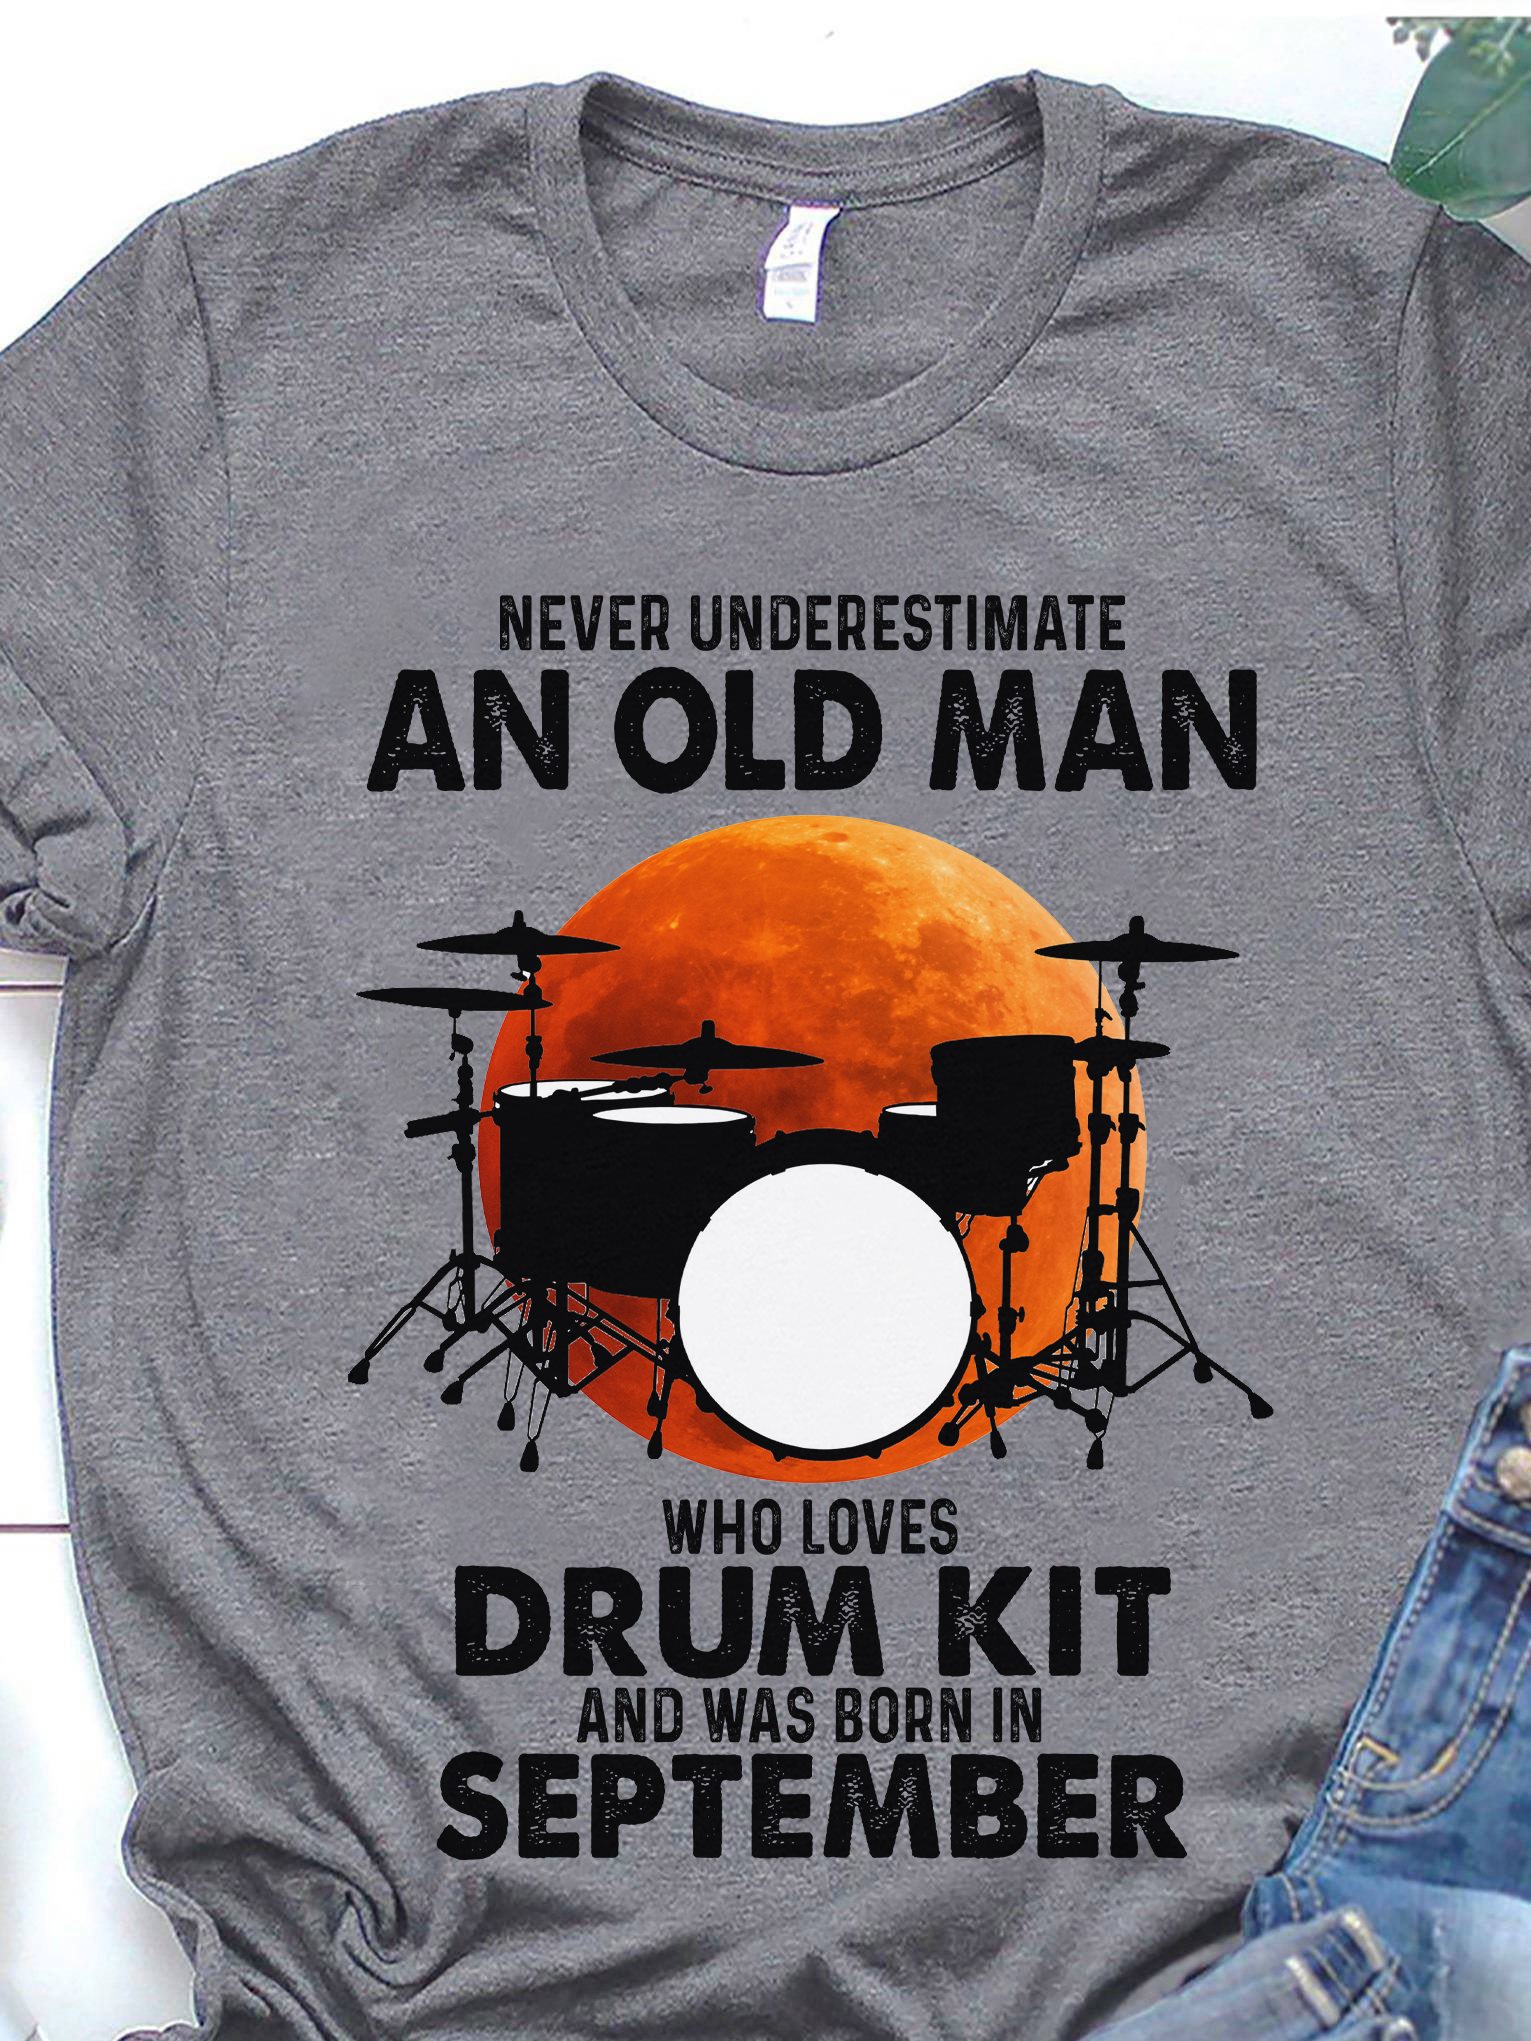 Never underestimate who loves drum kit and was born in September